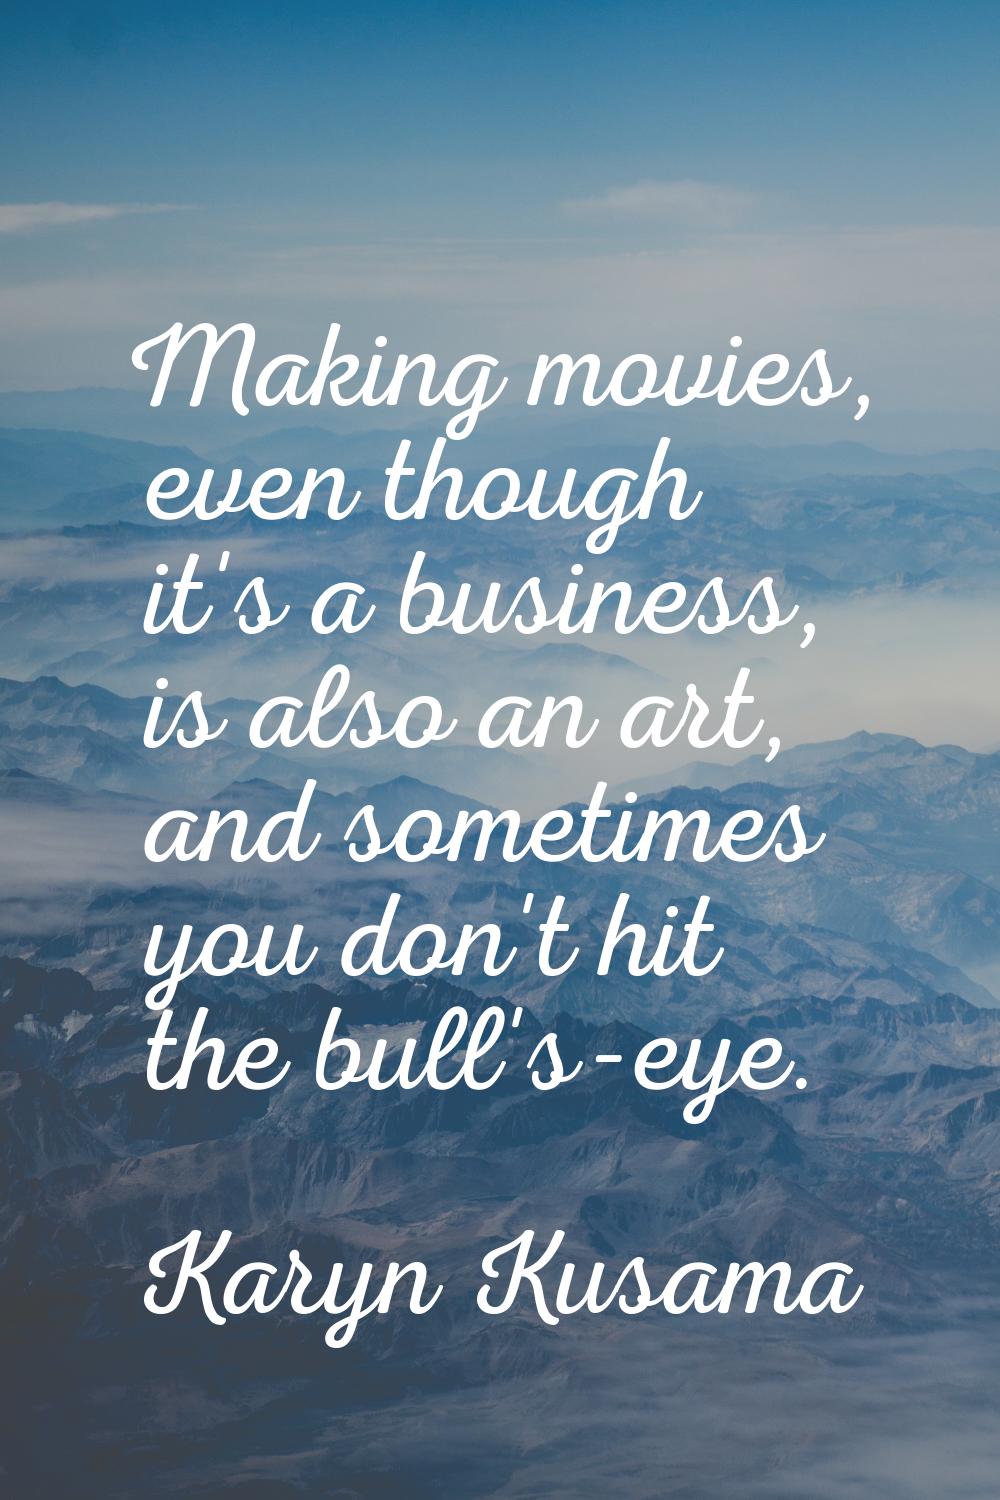 Making movies, even though it's a business, is also an art, and sometimes you don't hit the bull's-